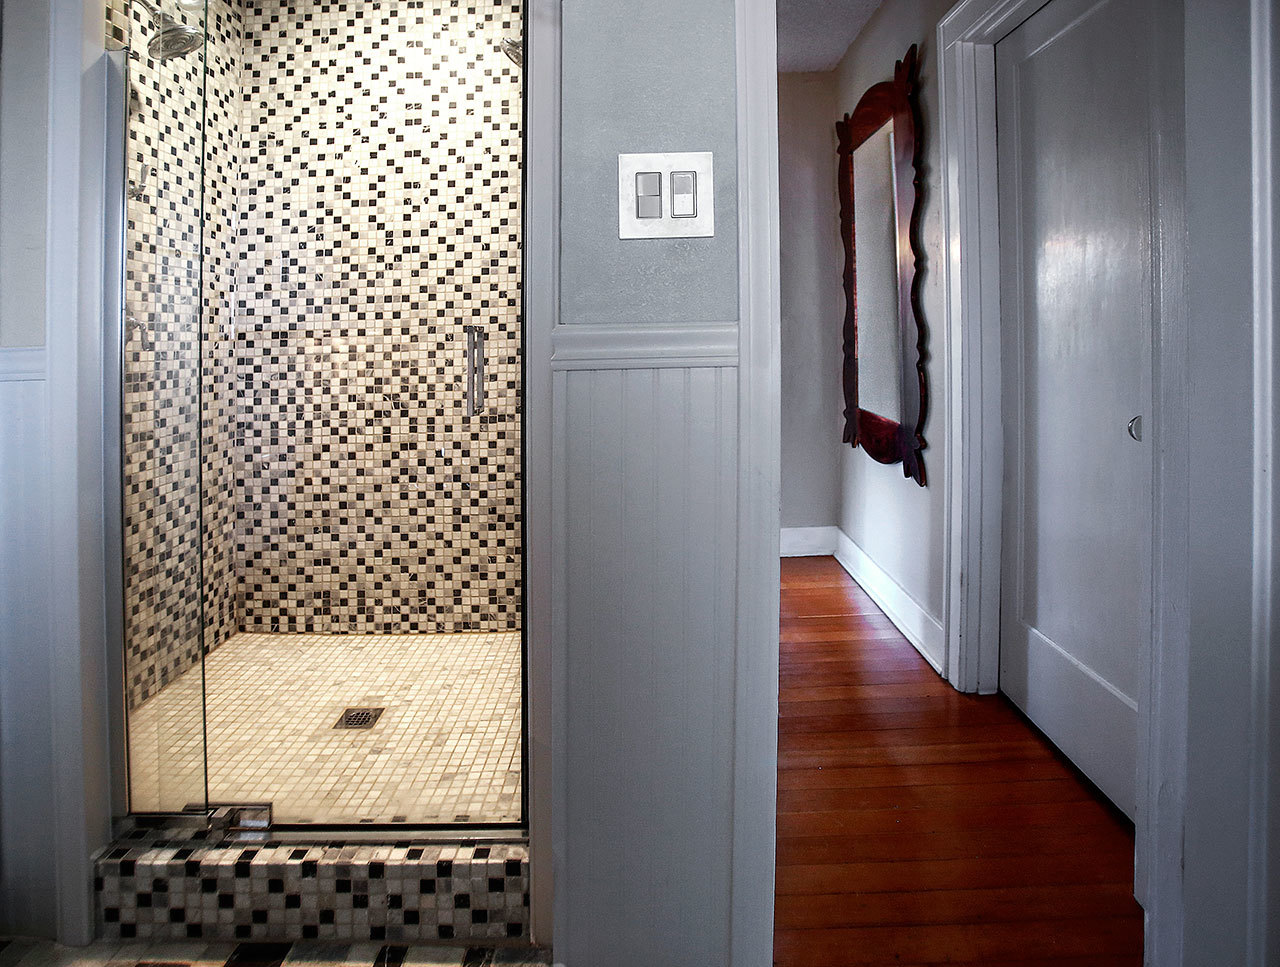 A tiled walk-in shower is a focal point in the bathroom. (Dan Bates / The Herald)
